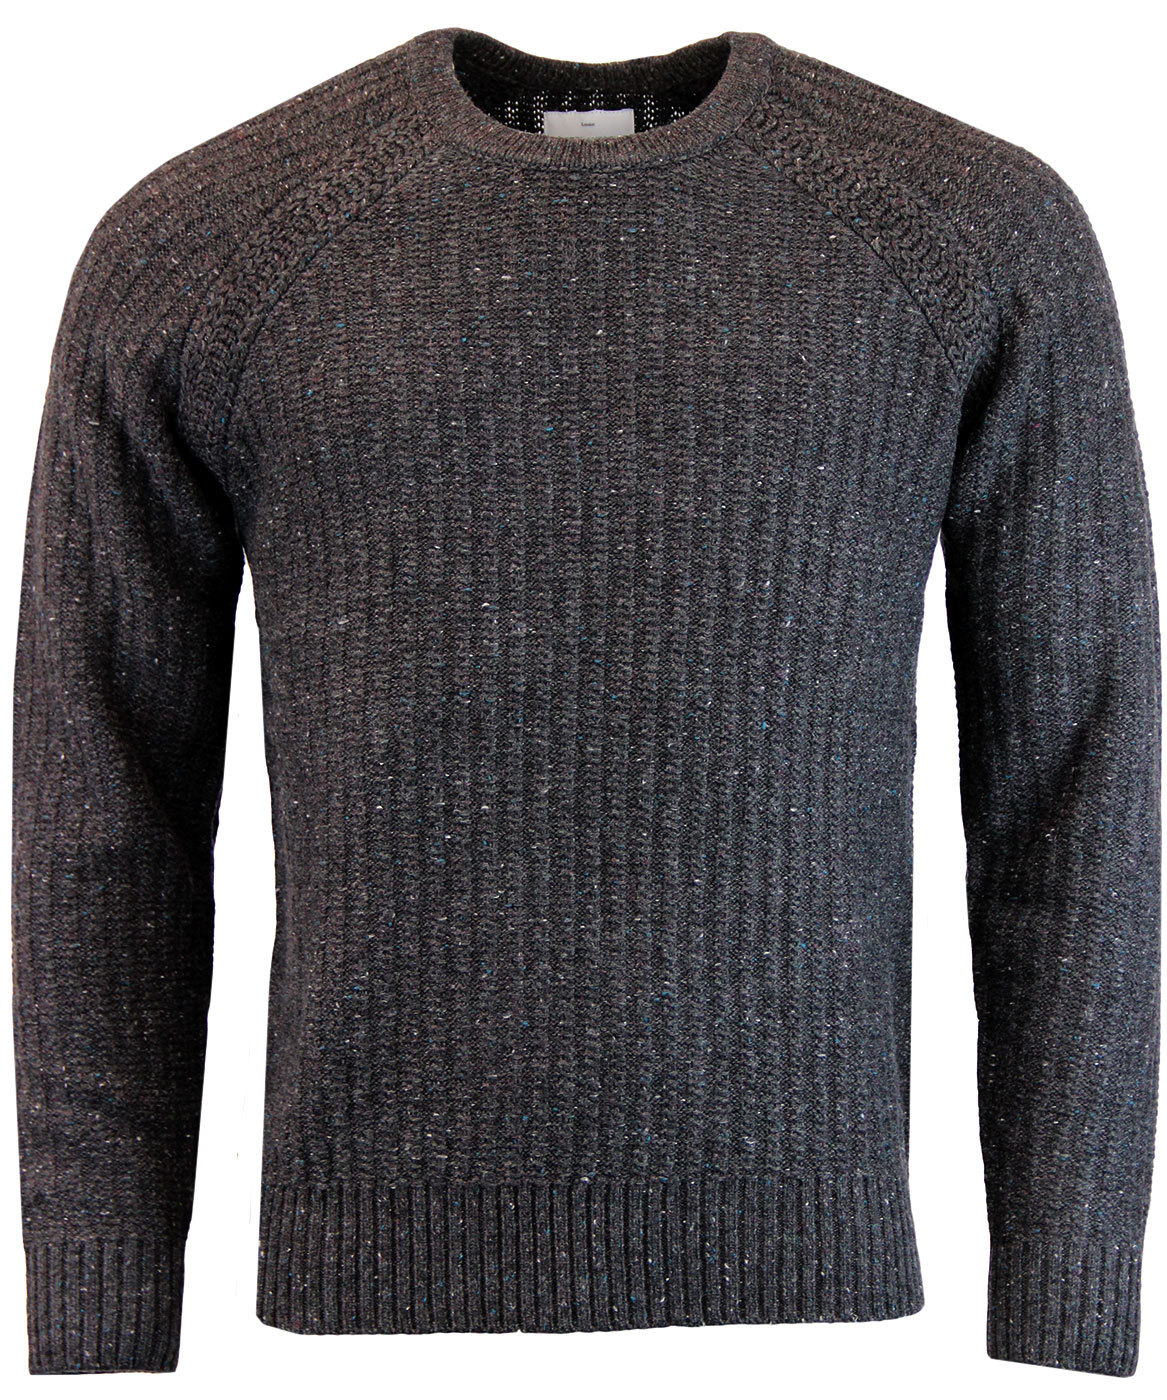 PETER WERTH Oregon Retro 1960s Mod Donegal Knit Jumper Charcoal